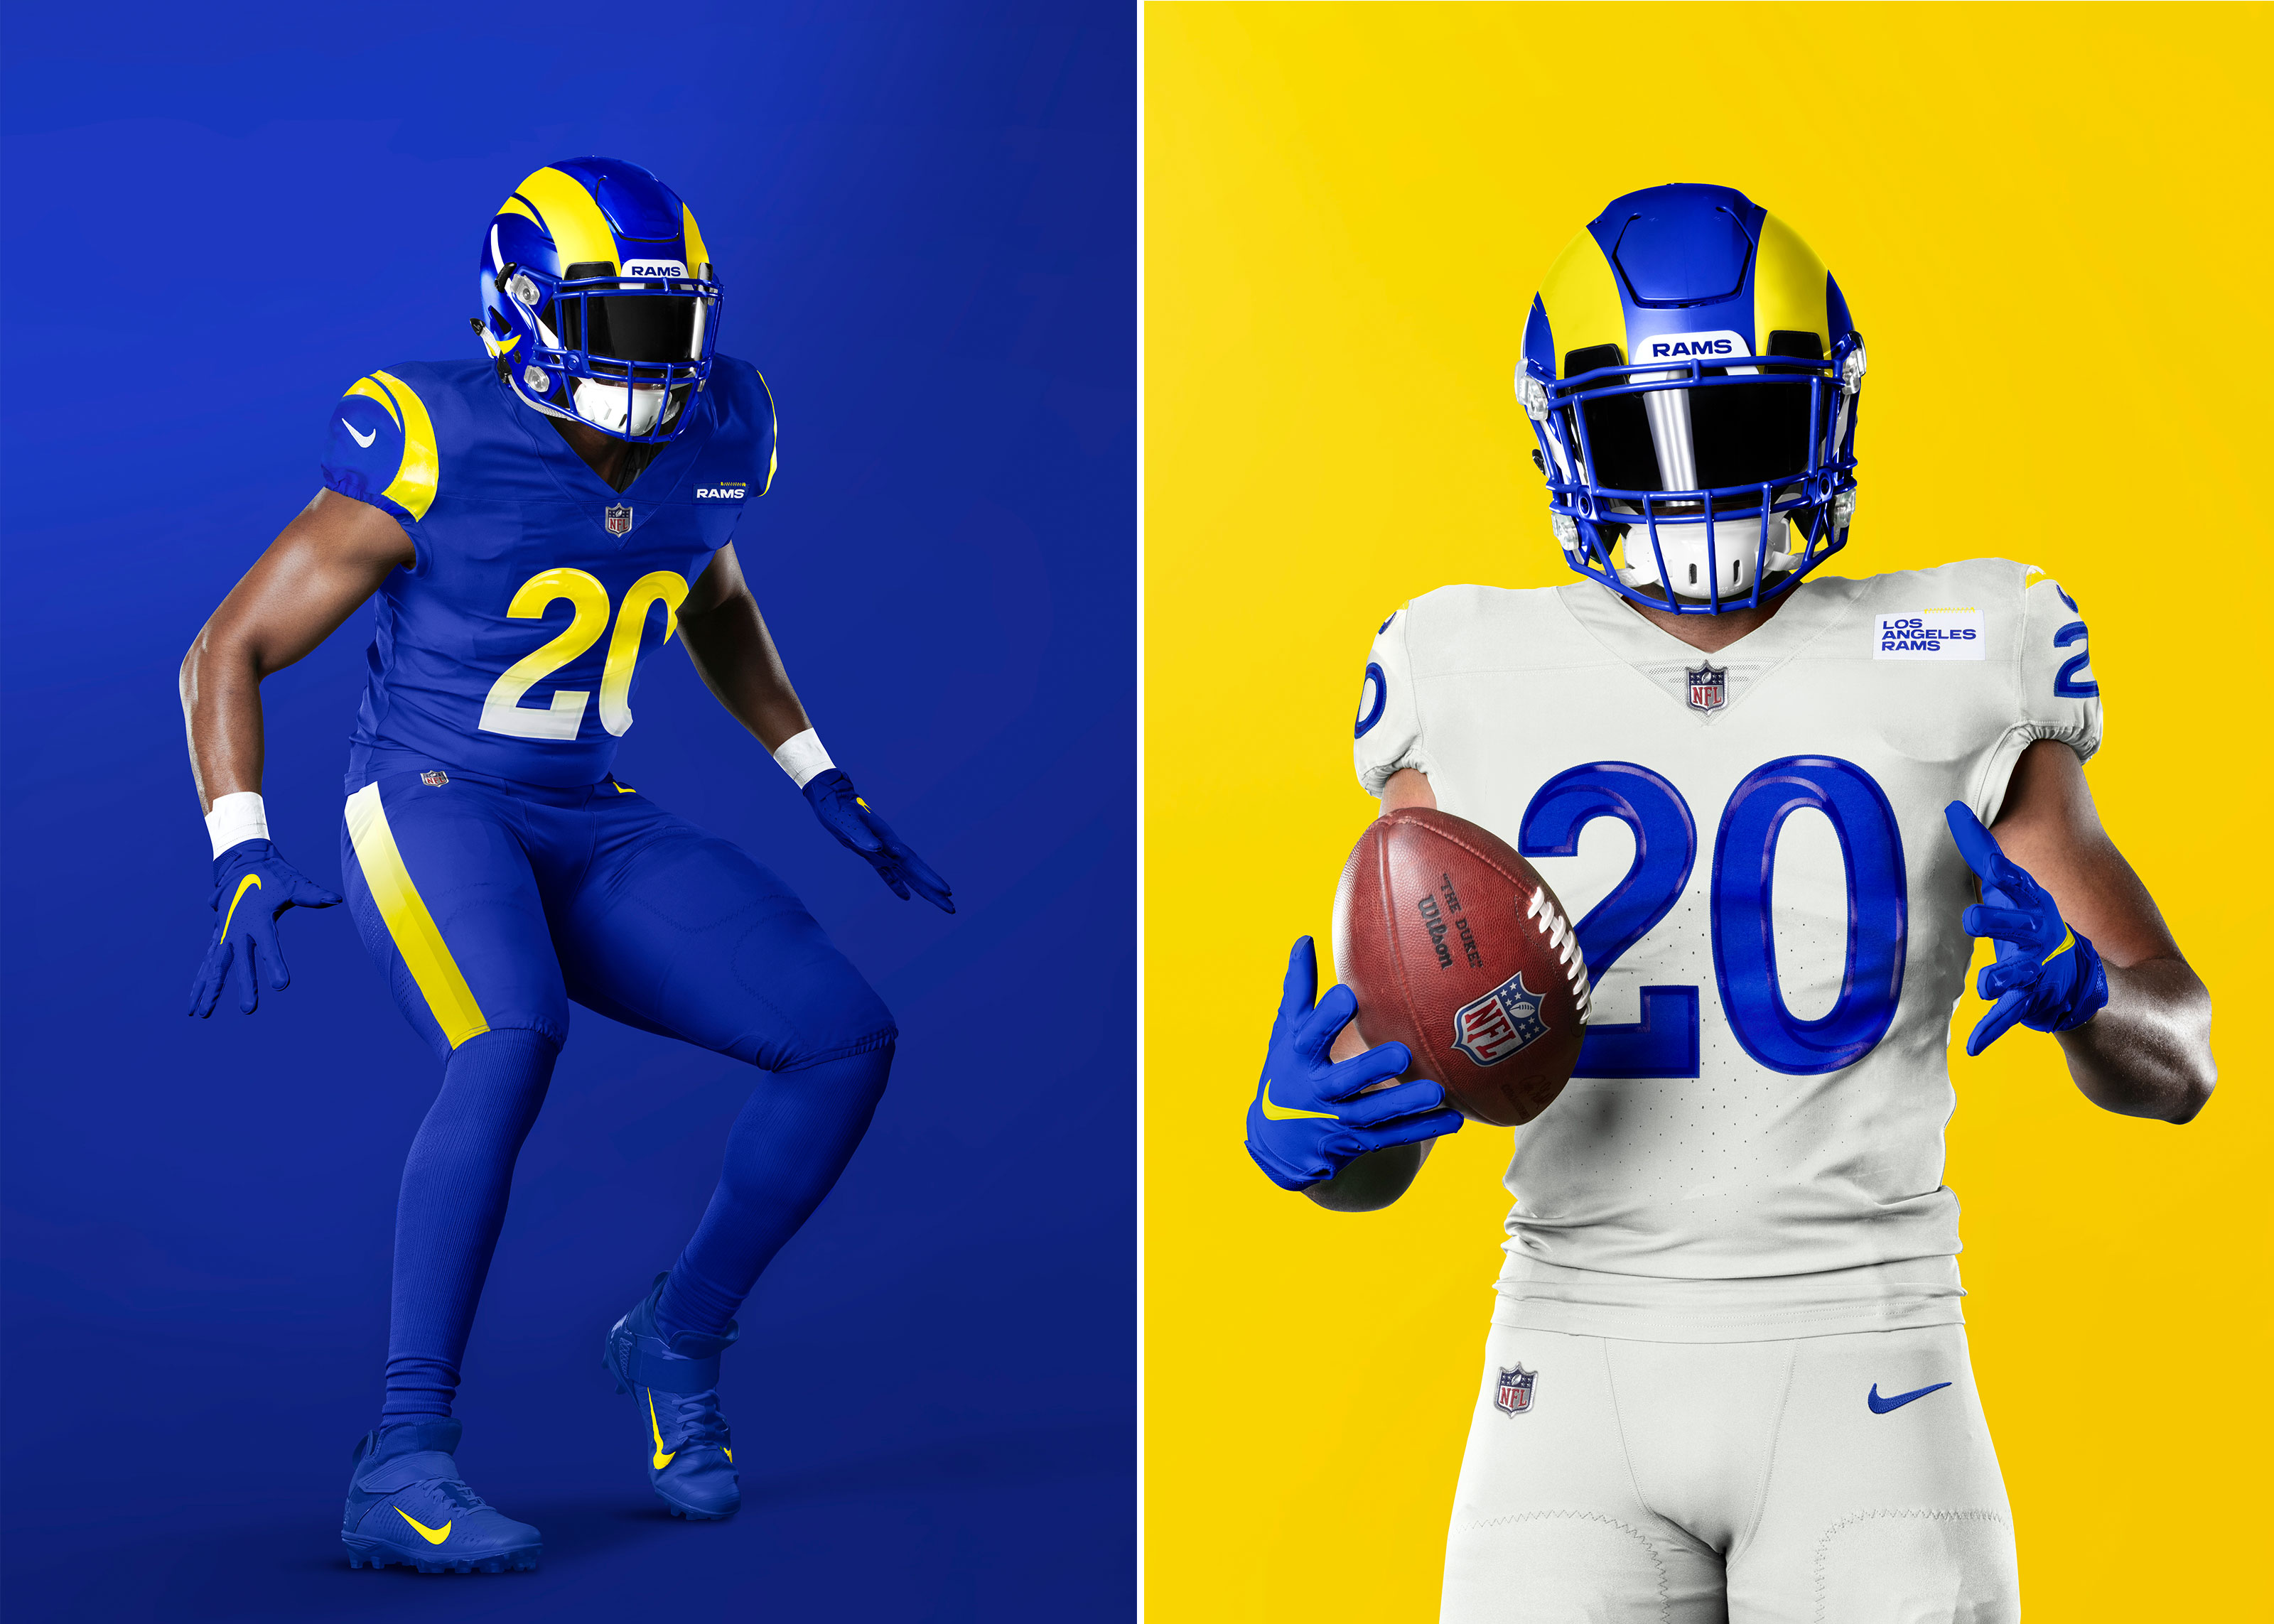 These Los Angeles Rams Uniforms Introduce a New Identity